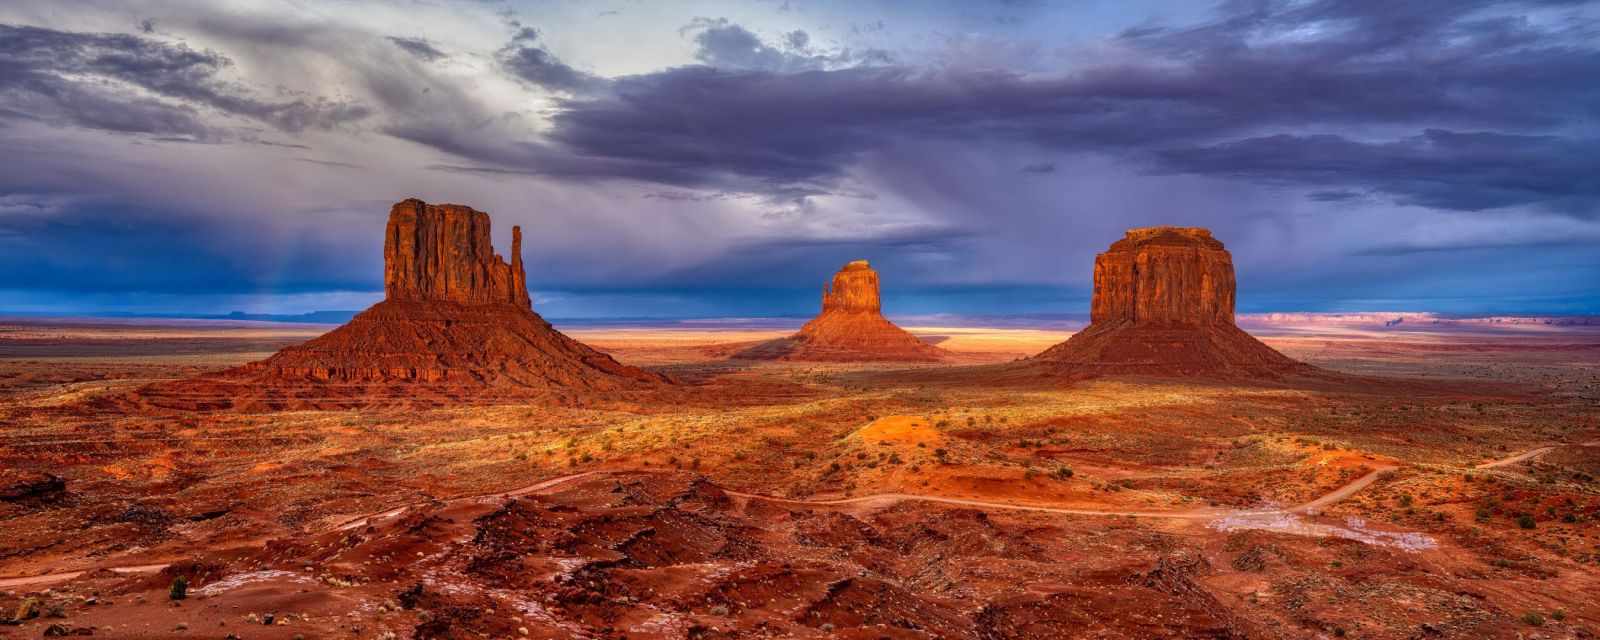 Monument Valley in Arizona - Best Time and 7 Need-to-Know Tips